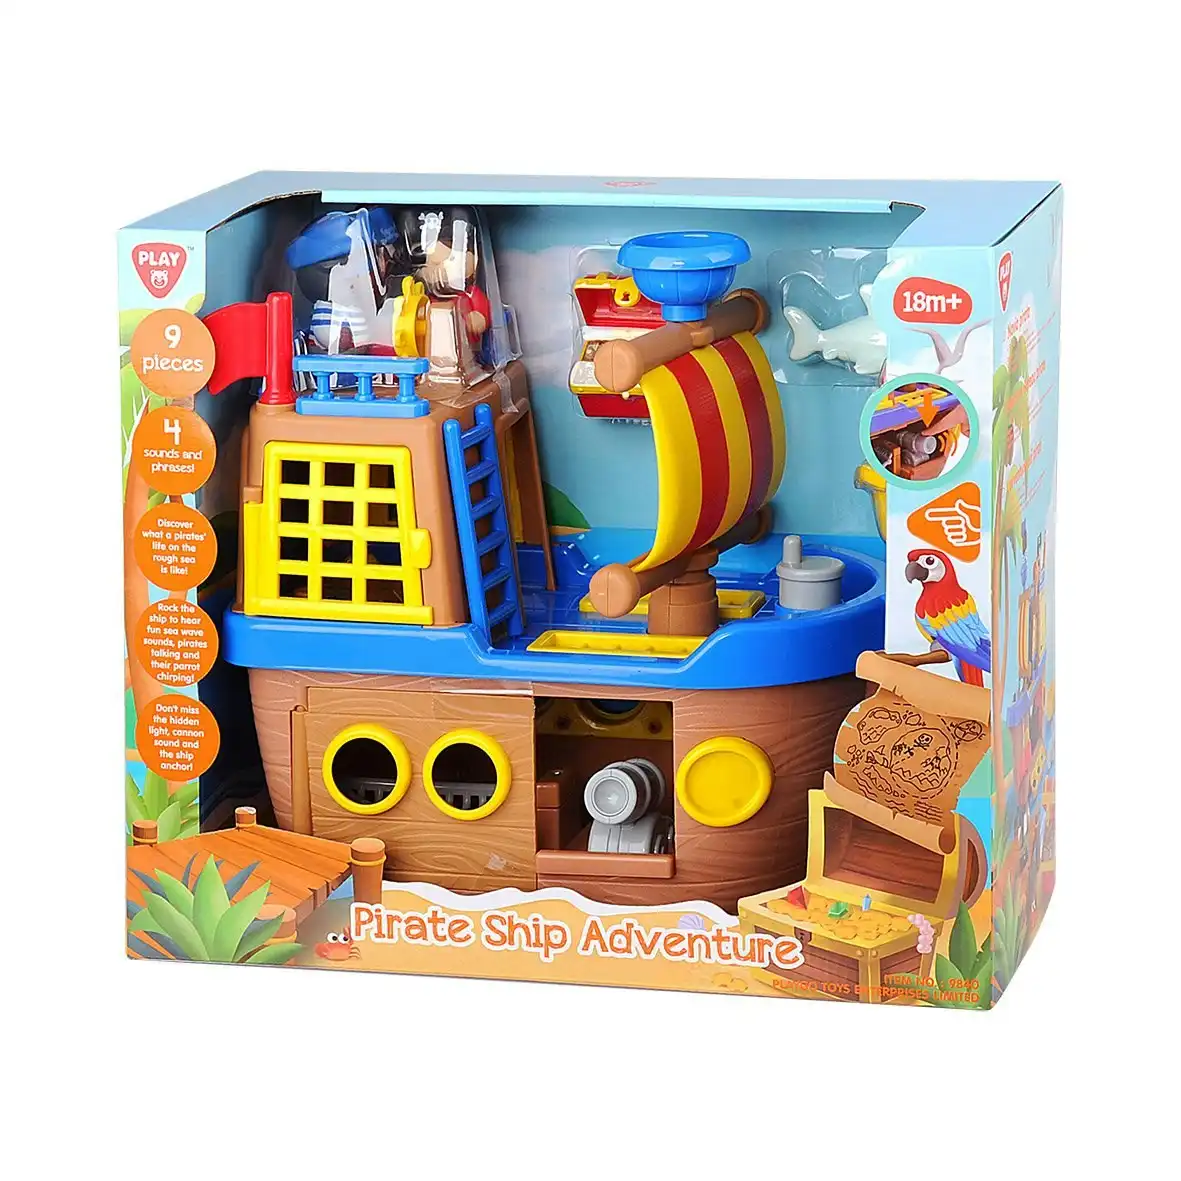 Pirate Battery Operated Ship Adventure Playgo Toys Ent. Ltd